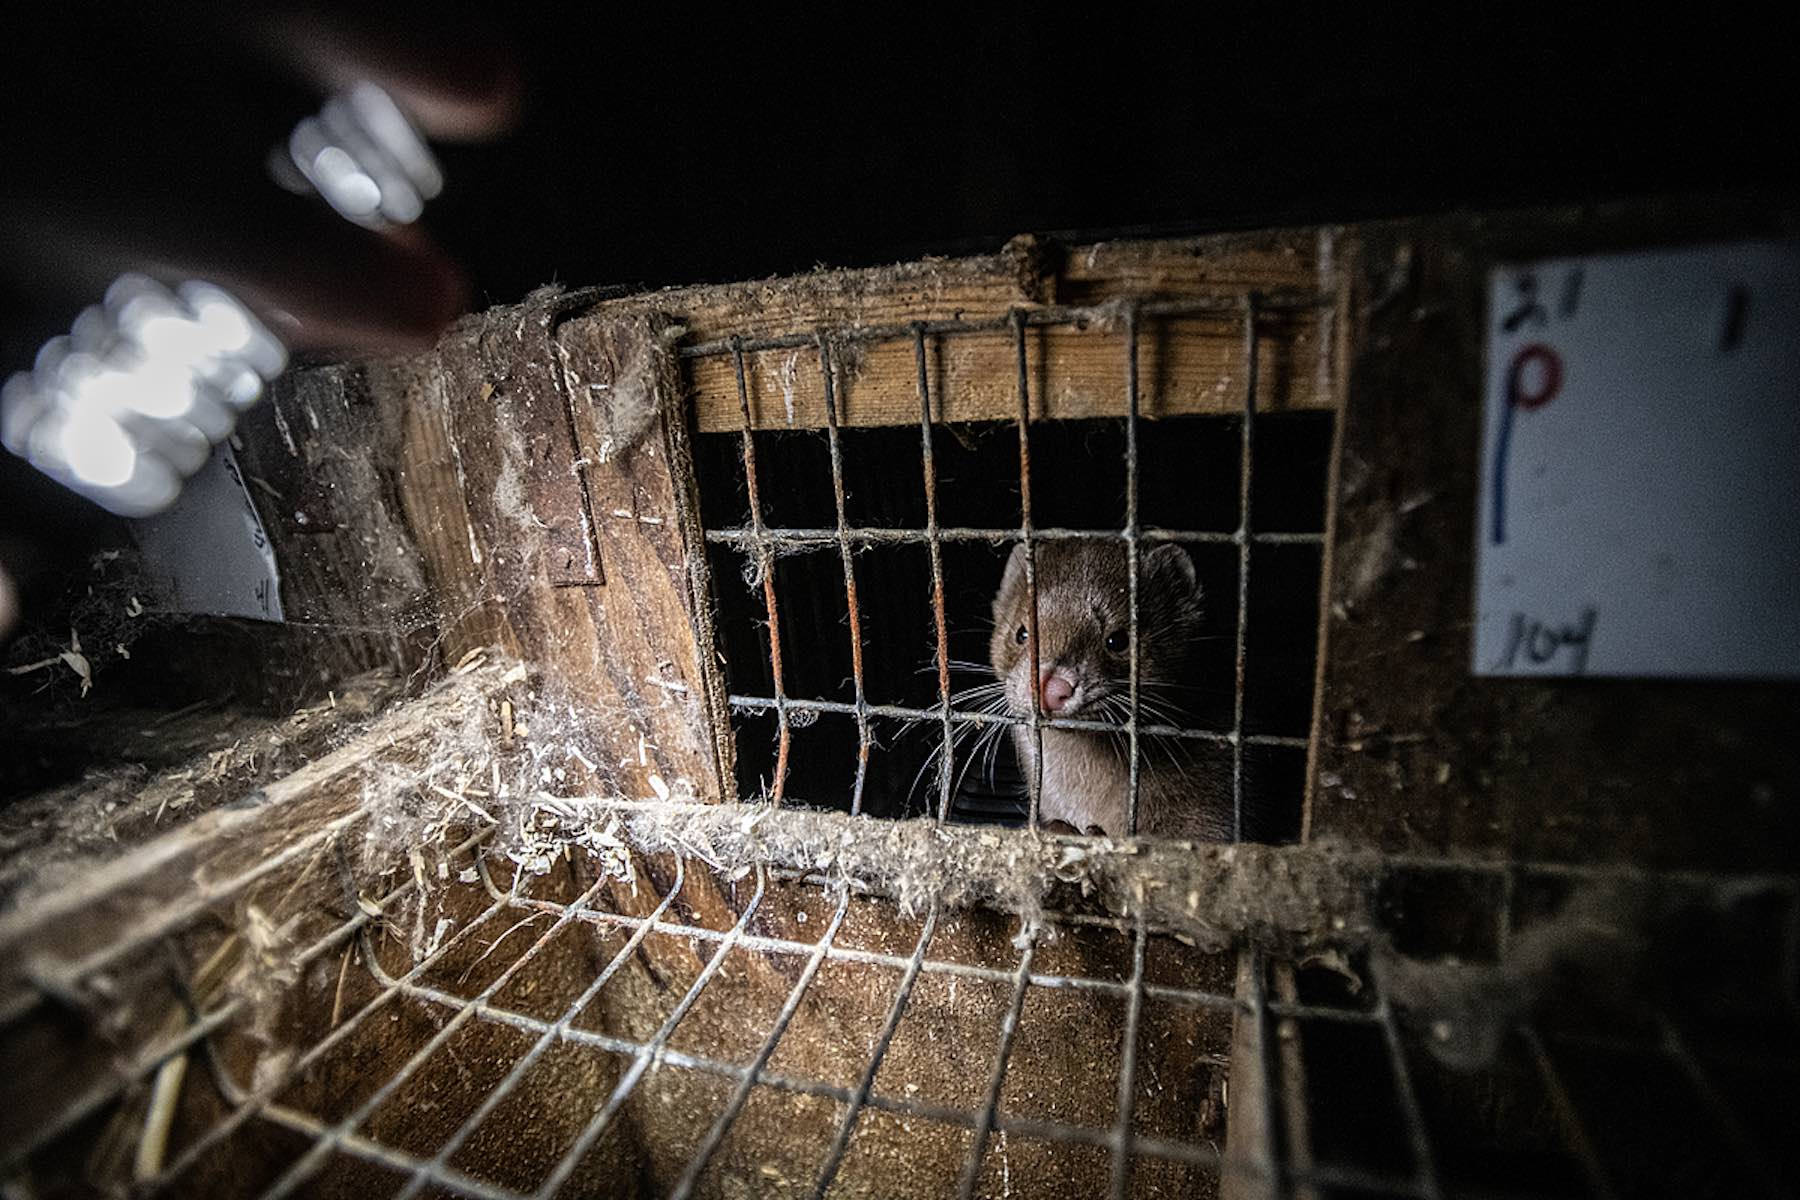 A lone female mink looks out through rusted wire mesh from the inside of a nesting bed at a fur farm in Quebec, Canada. She is illuminated by an LED light being held by the photographer.